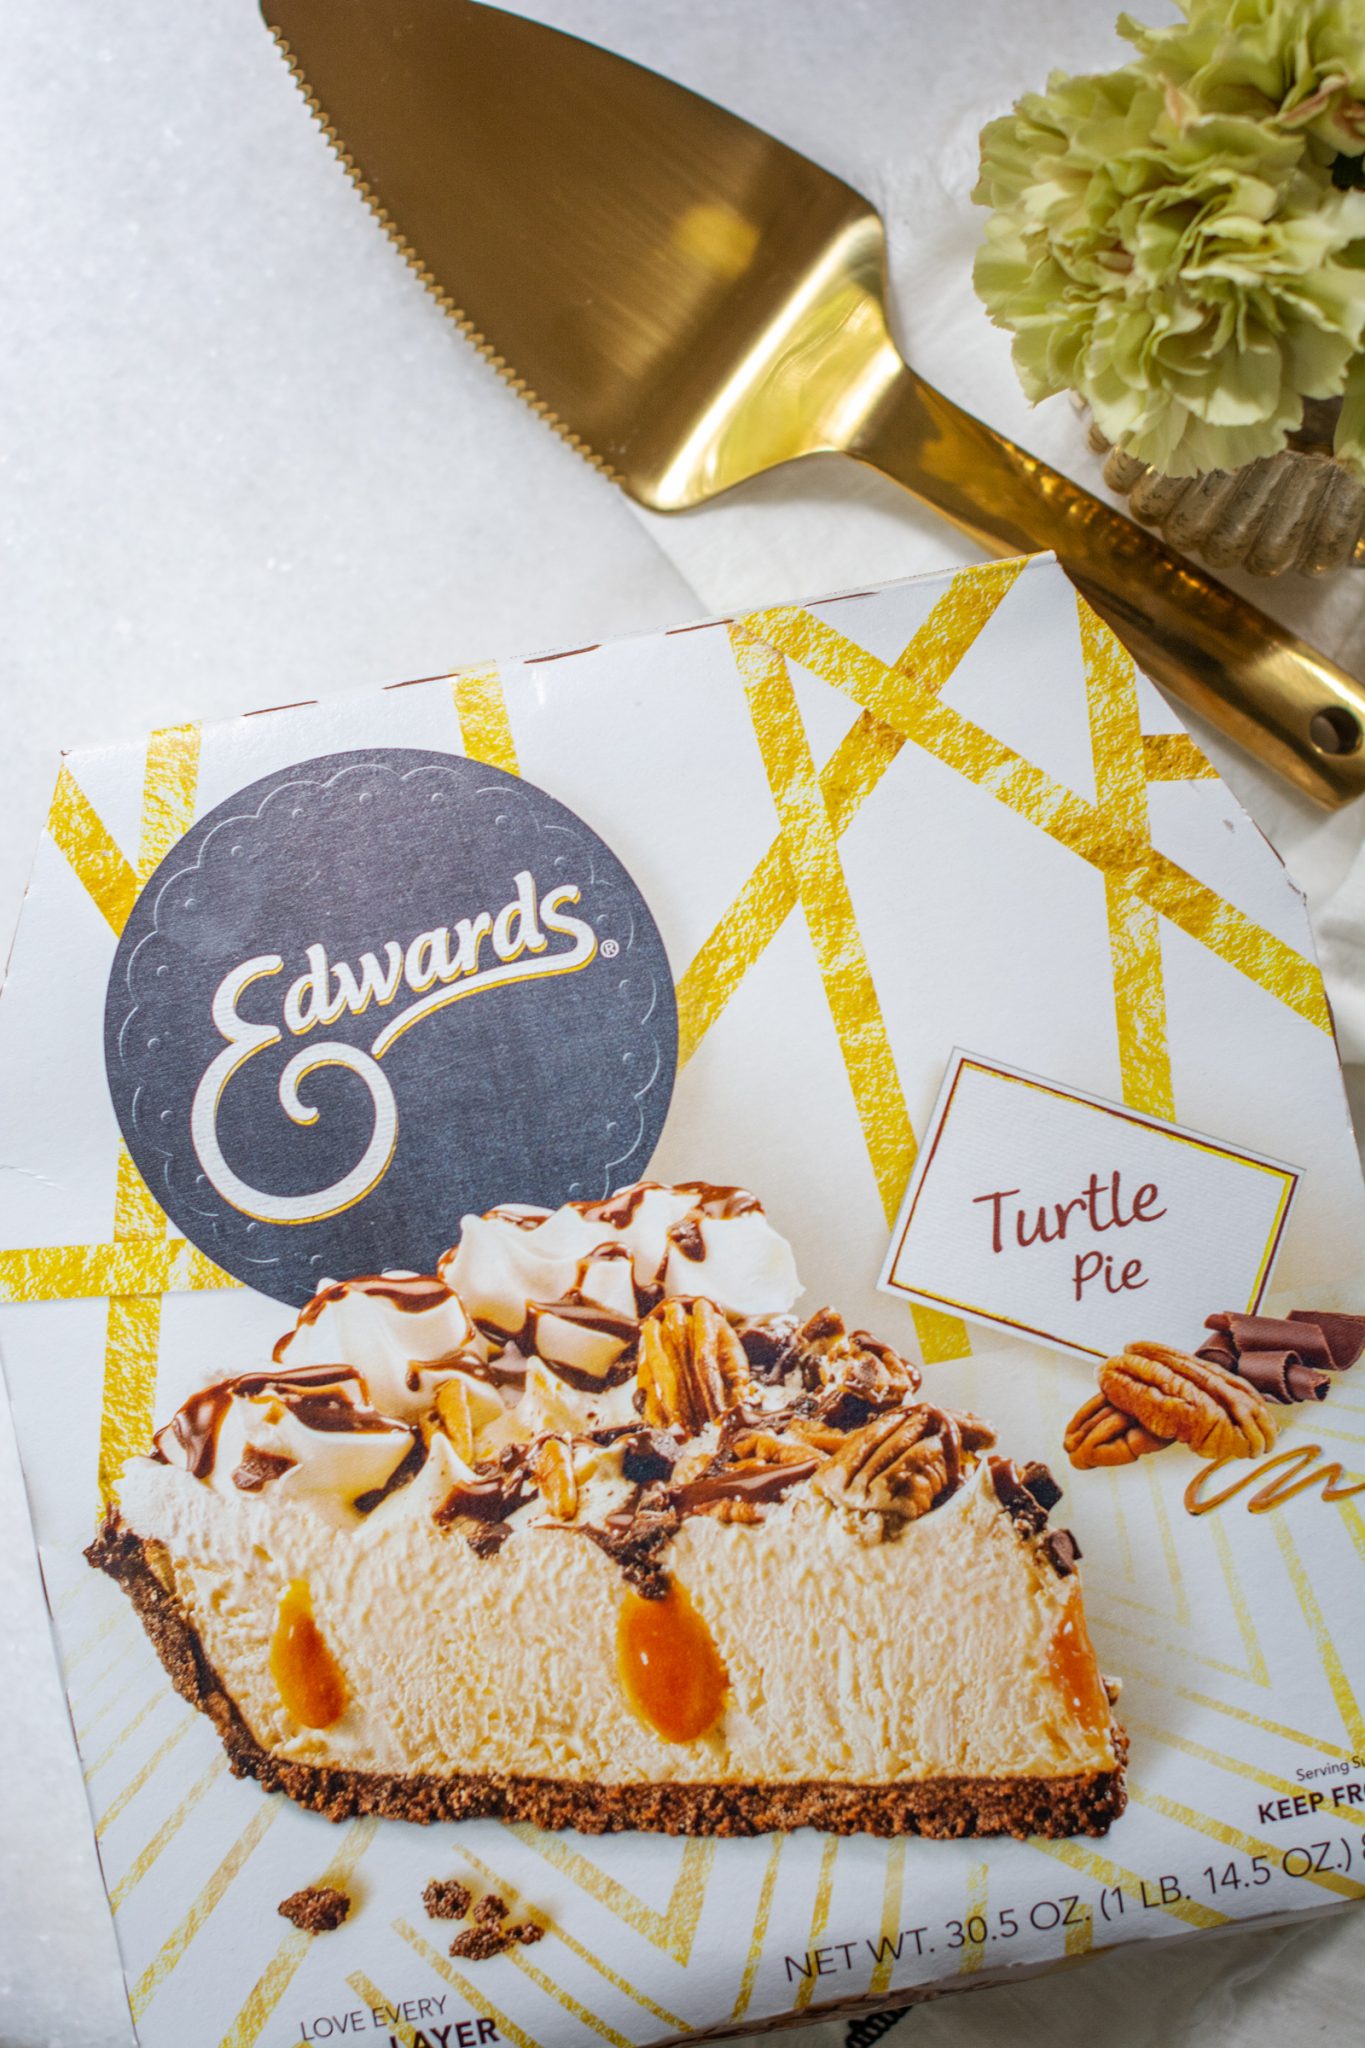 Edwards turtle pie package with gold pie slicer and flowers